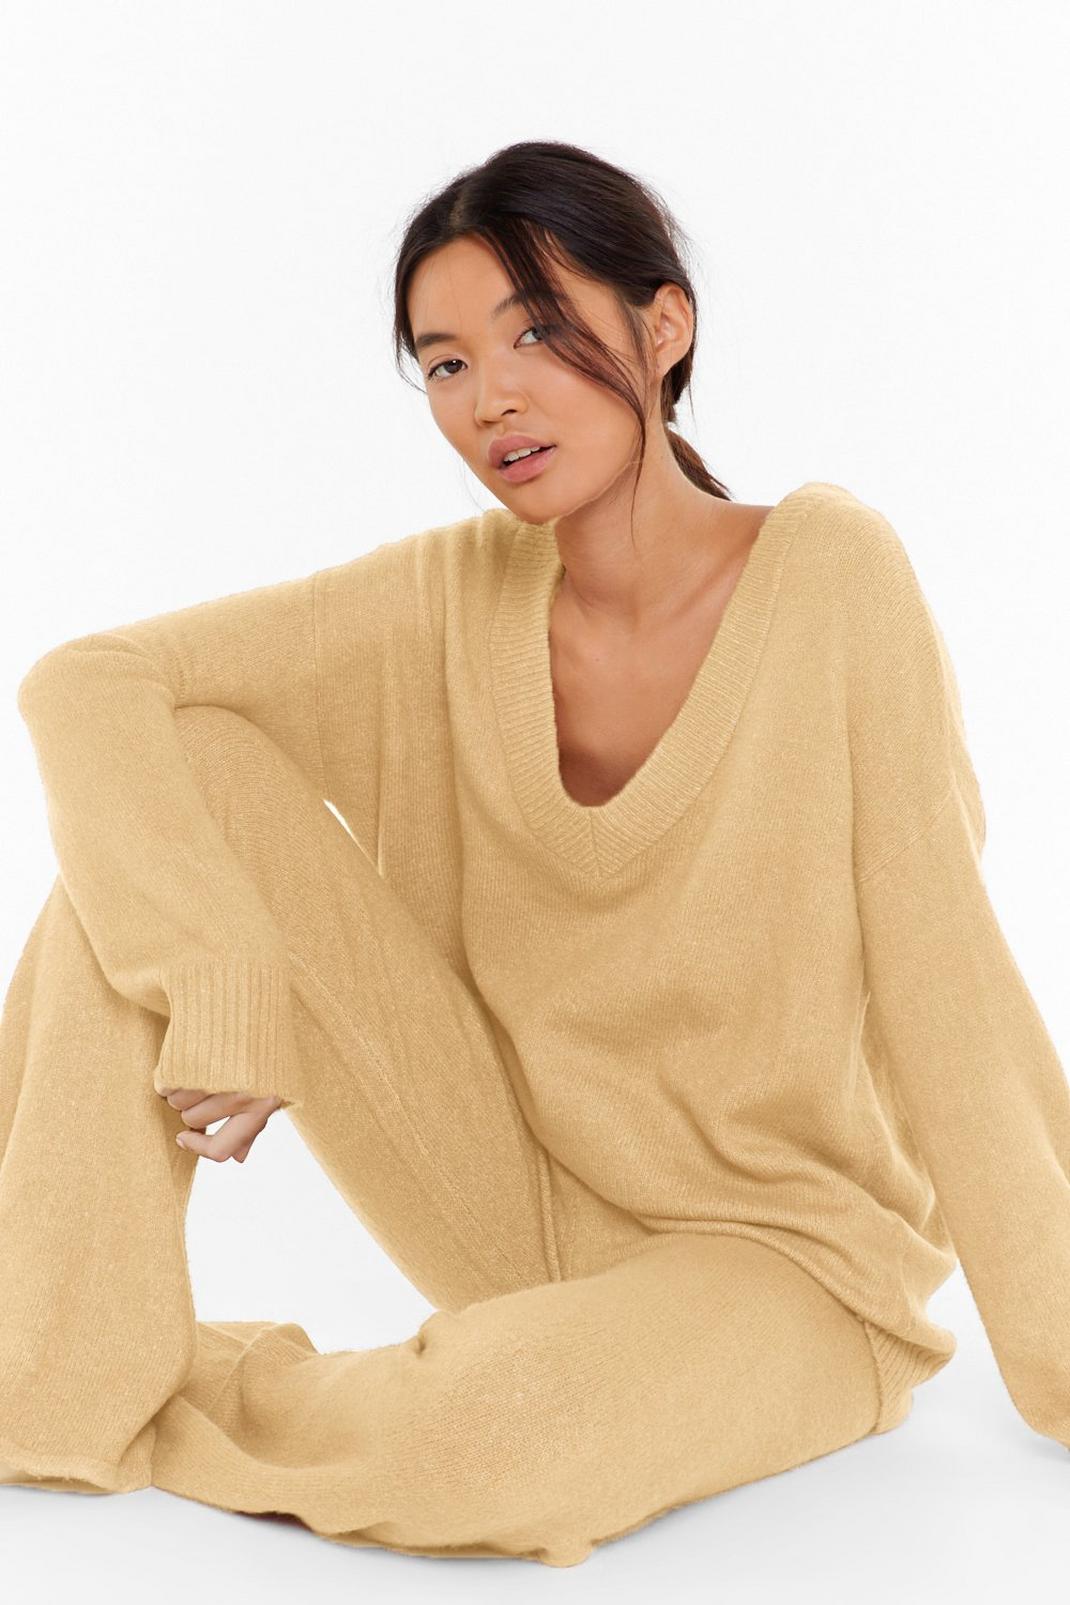 Sand Sounds Good to V-Neck Knitted Trousers Lounge Set image number 1